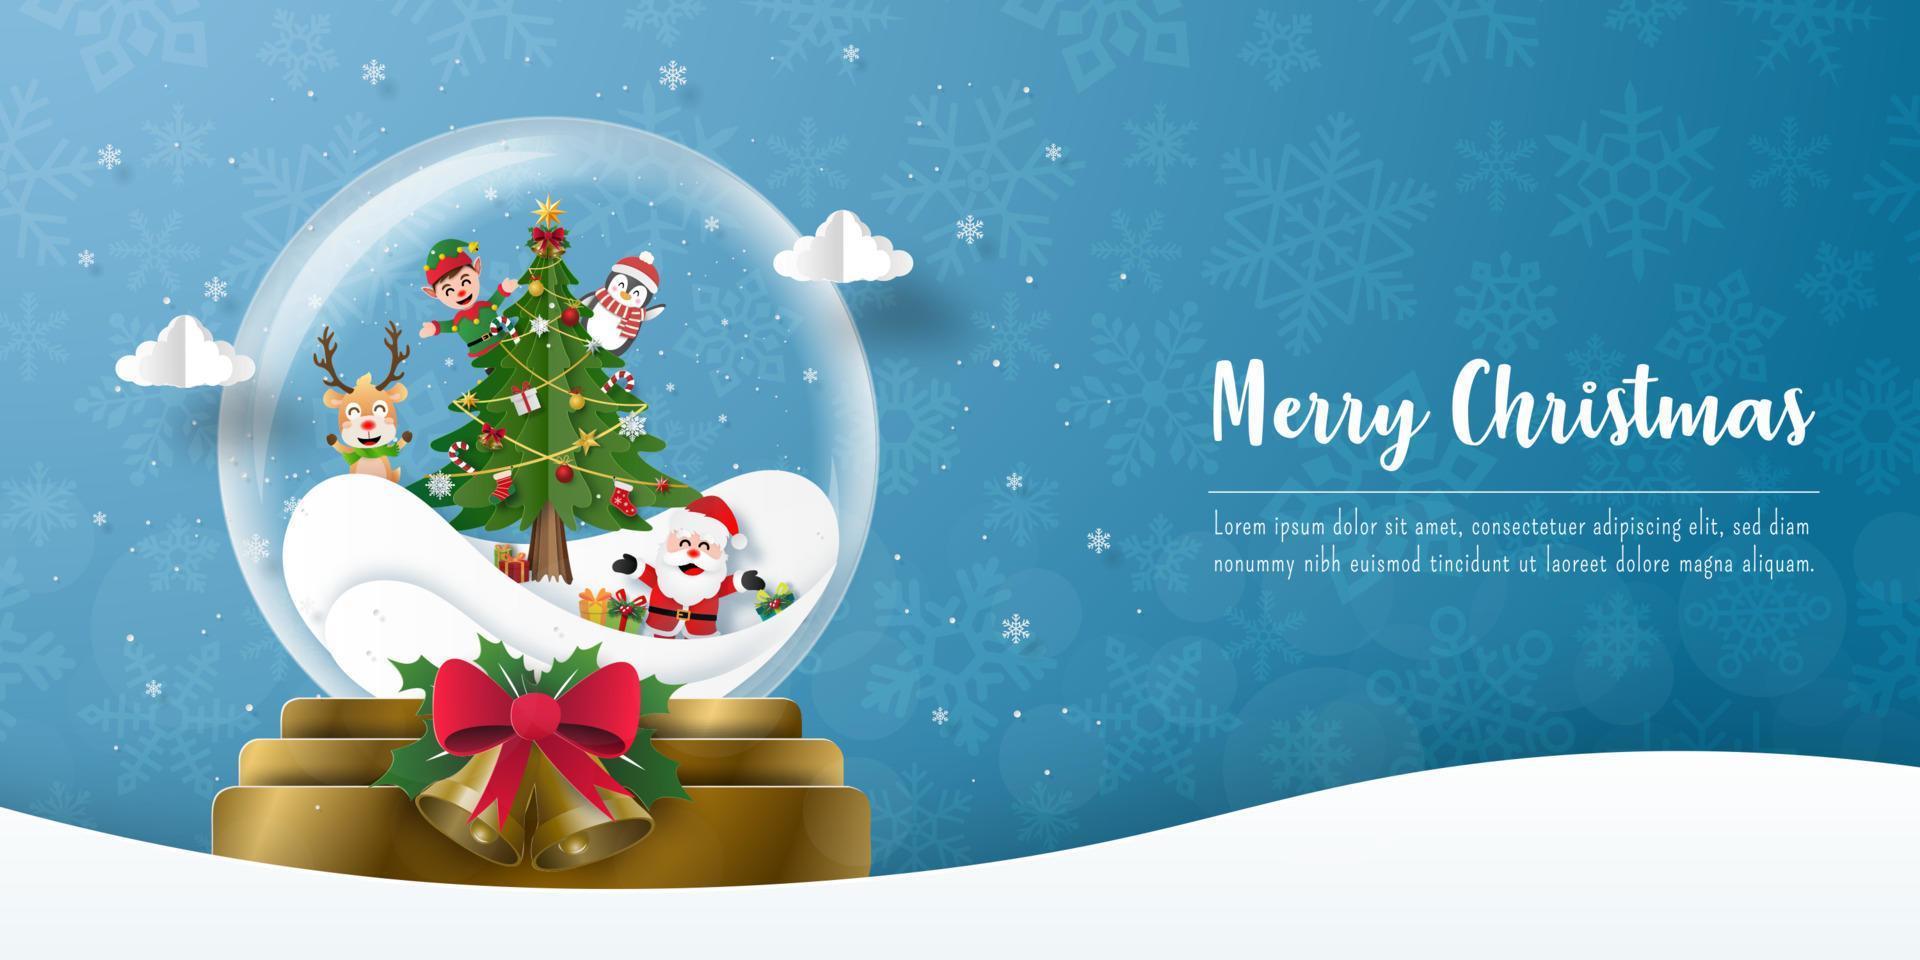 Merry Christmas and Happy New Year, Christmas party with Santa Claus in a Christmas ball, Banner background vector